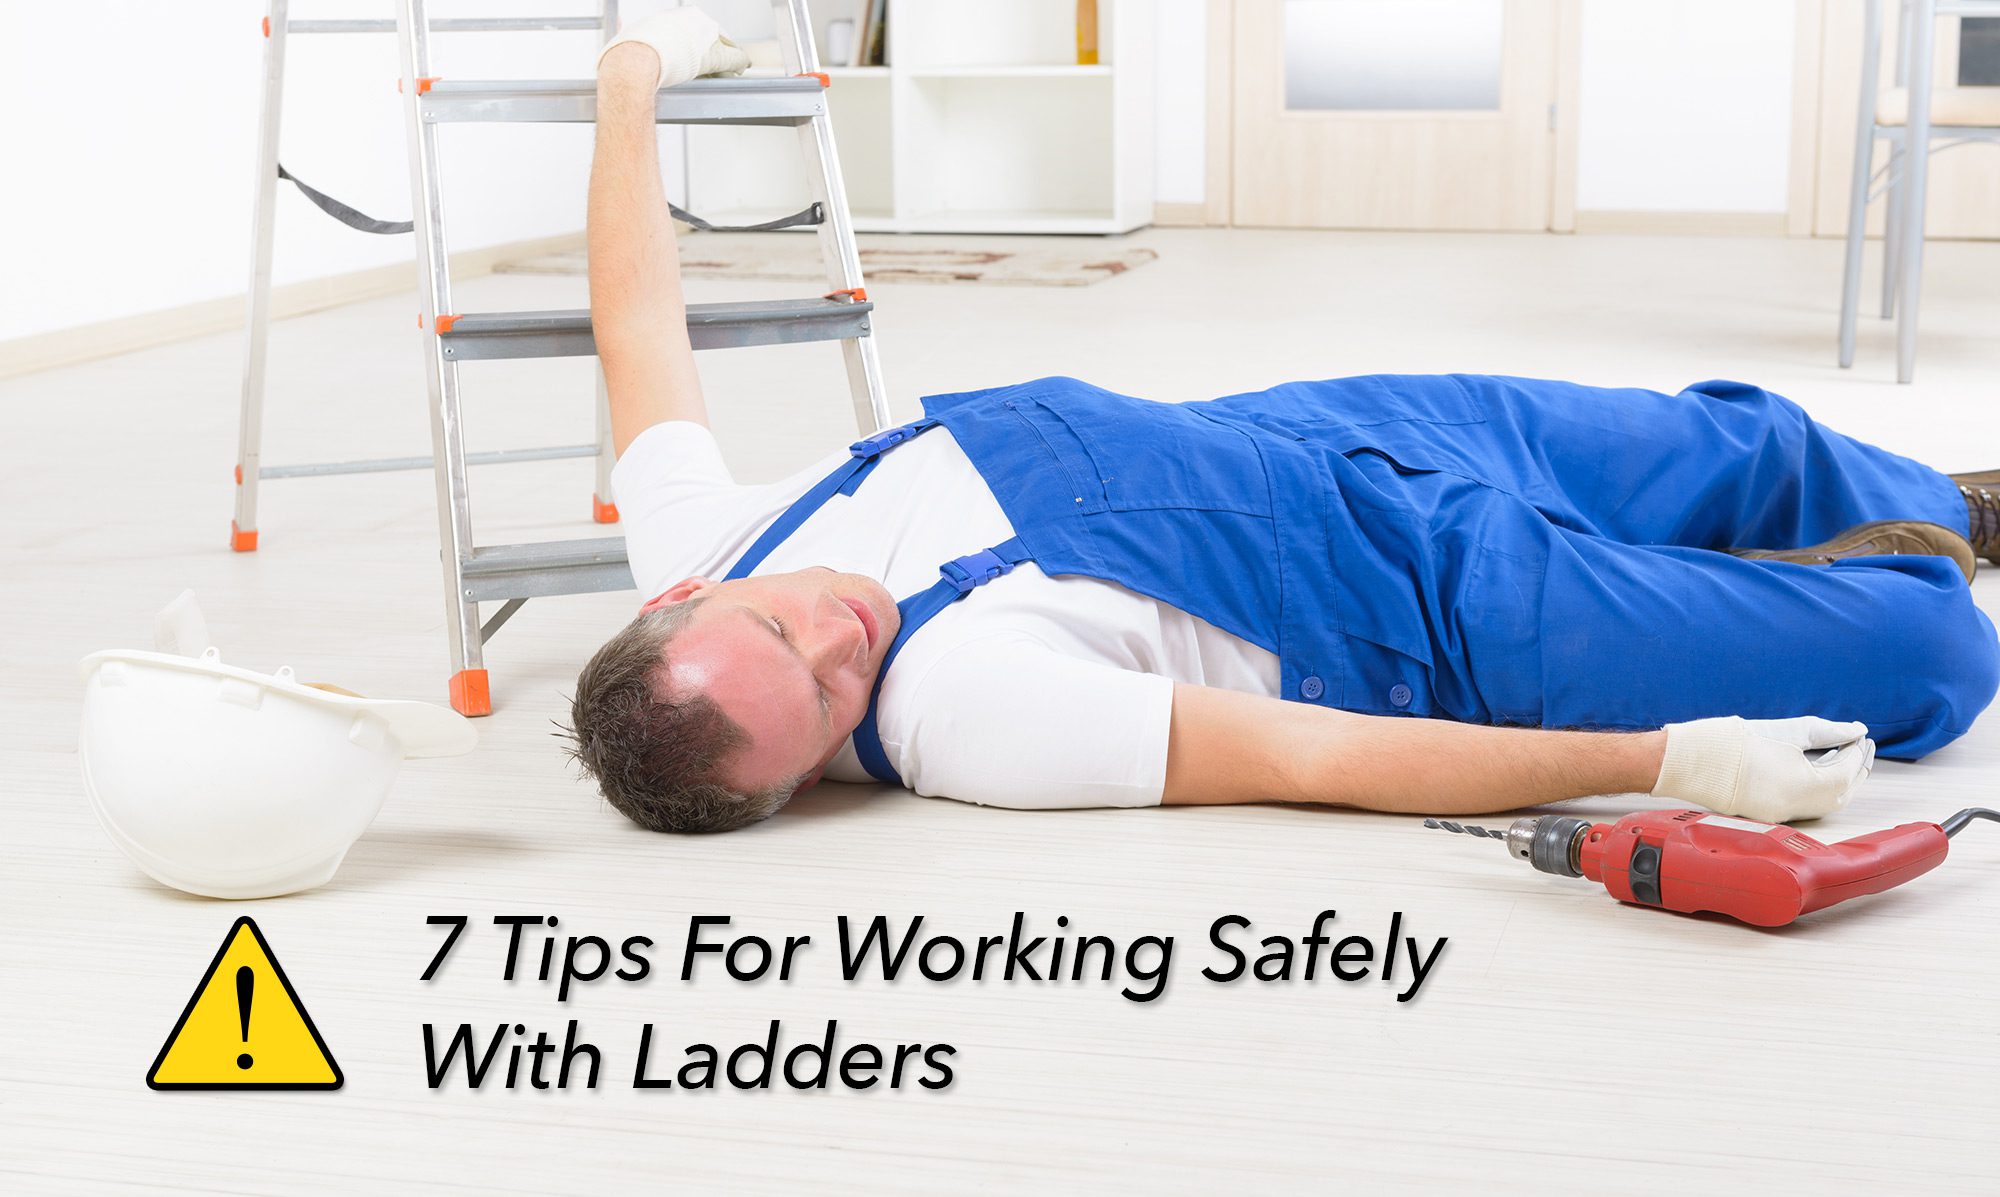 7 Tips For Working Safely With Ladders